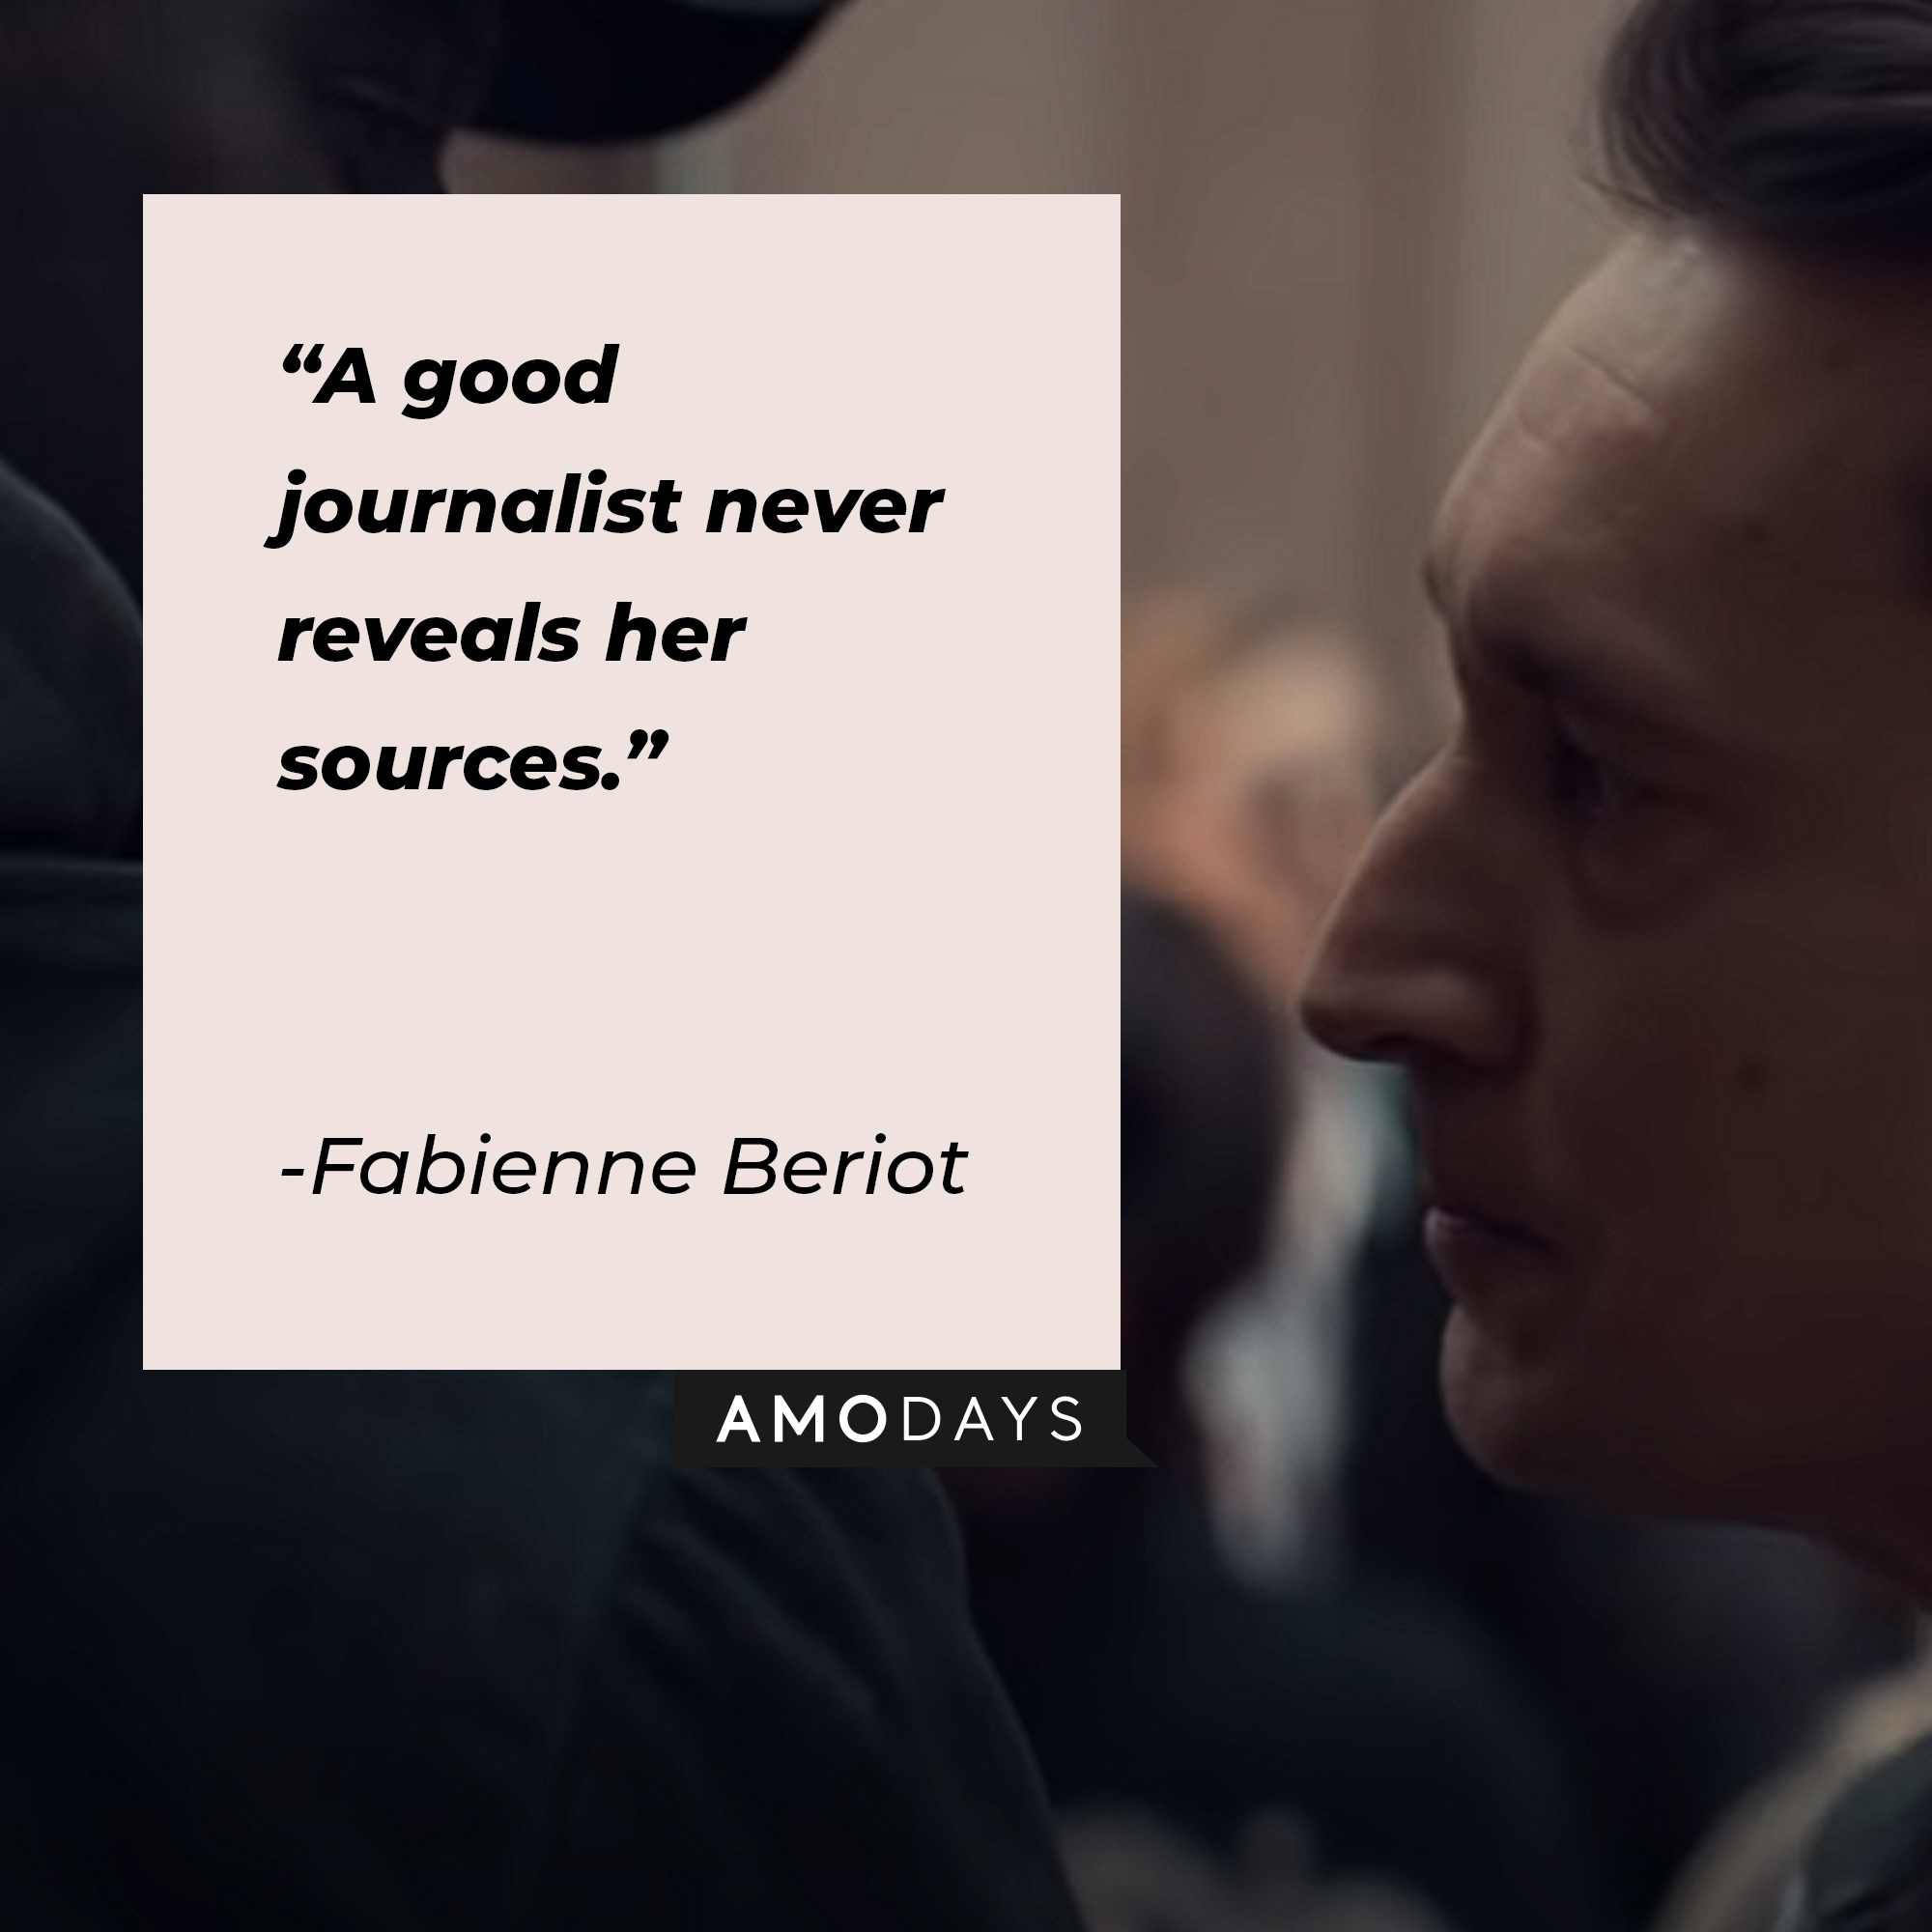 Fabienne Beriot's quote: "A good journalist never reveals her sources." | Image: Amodays